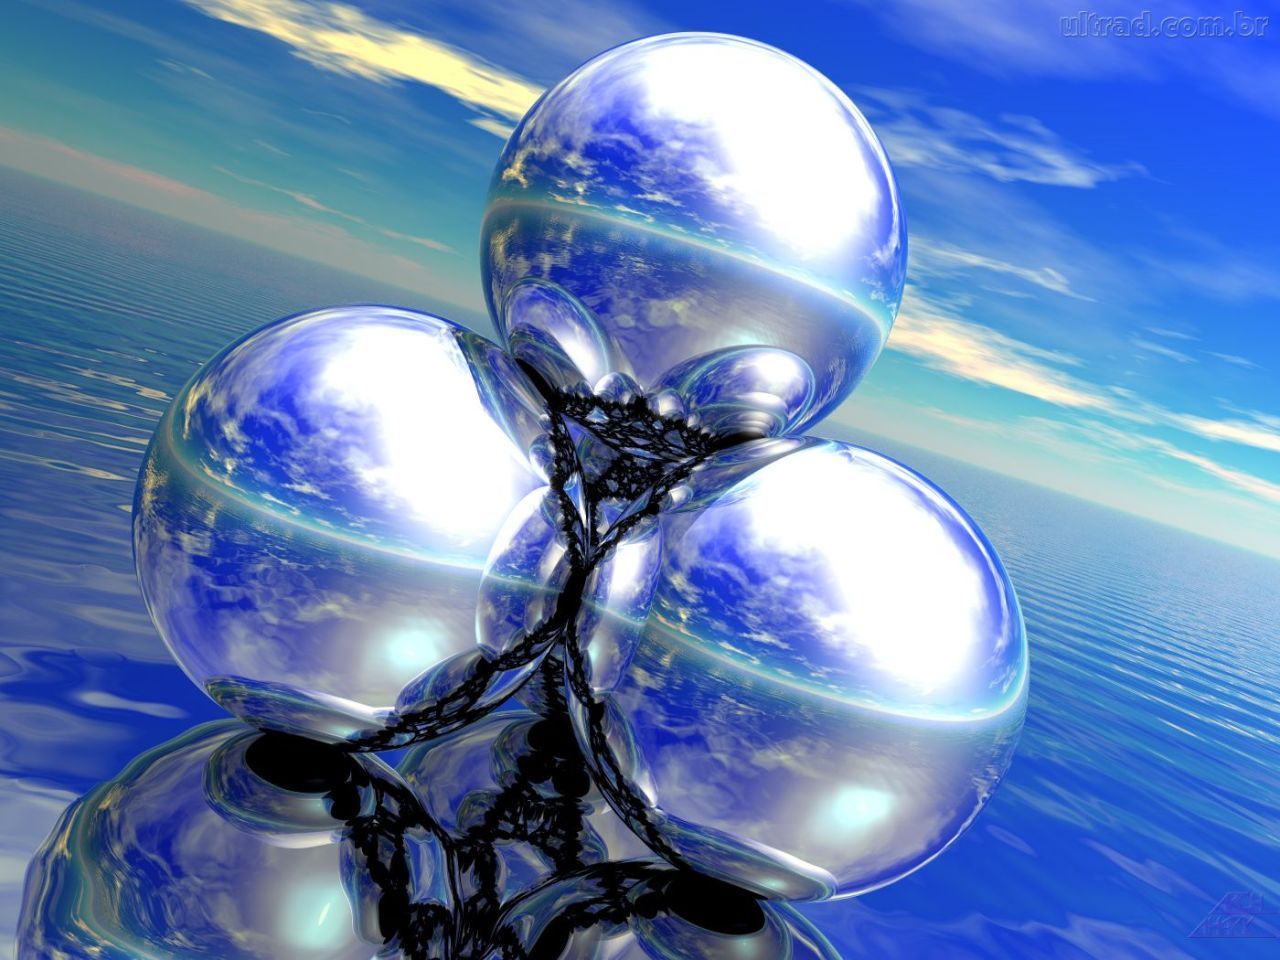 A group of silver balls on top water - Y2K, 2000s, alien